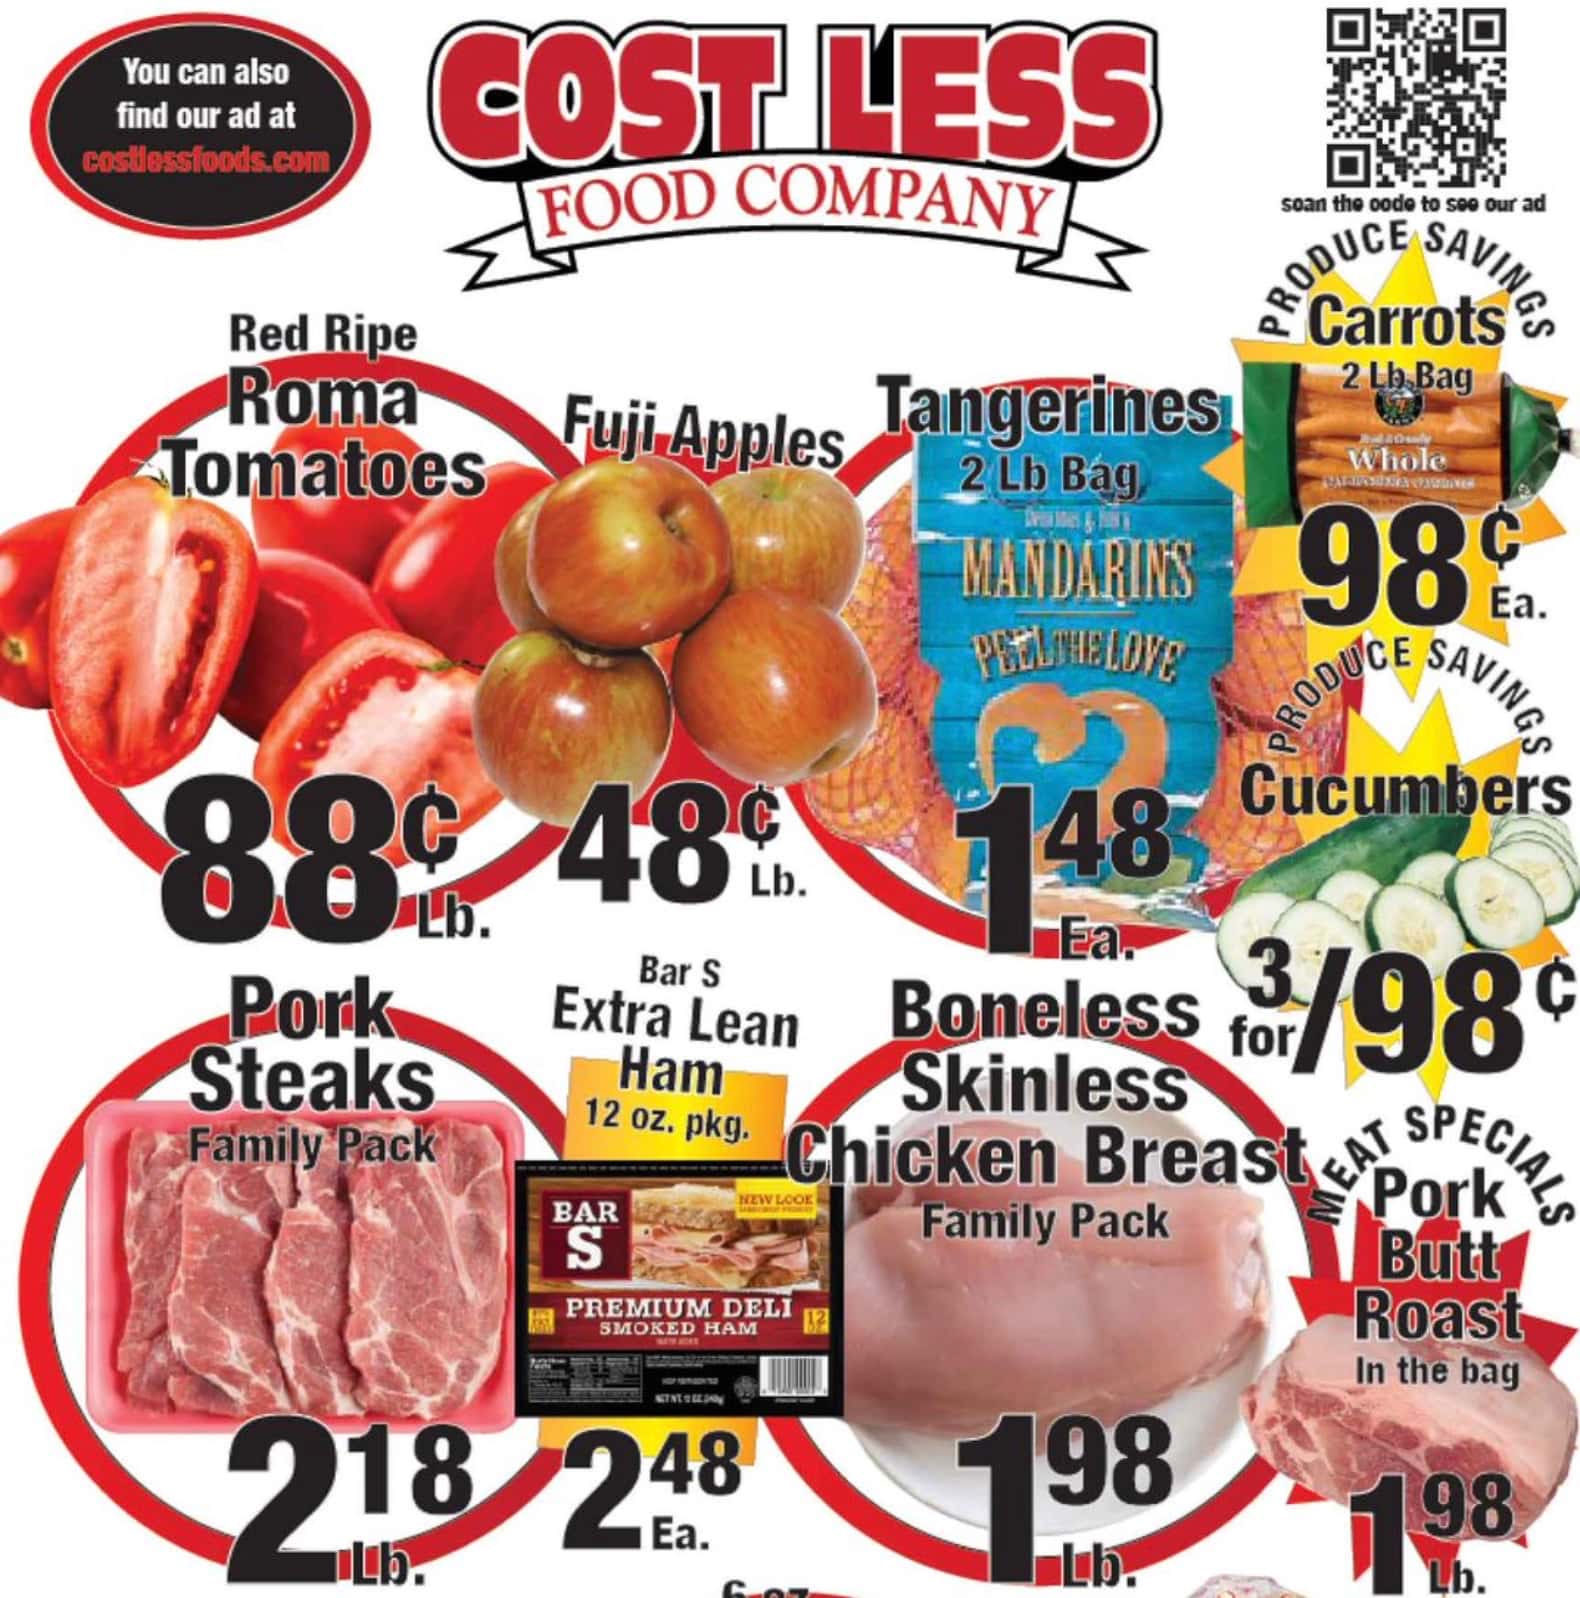 Cost Less Food Flyer